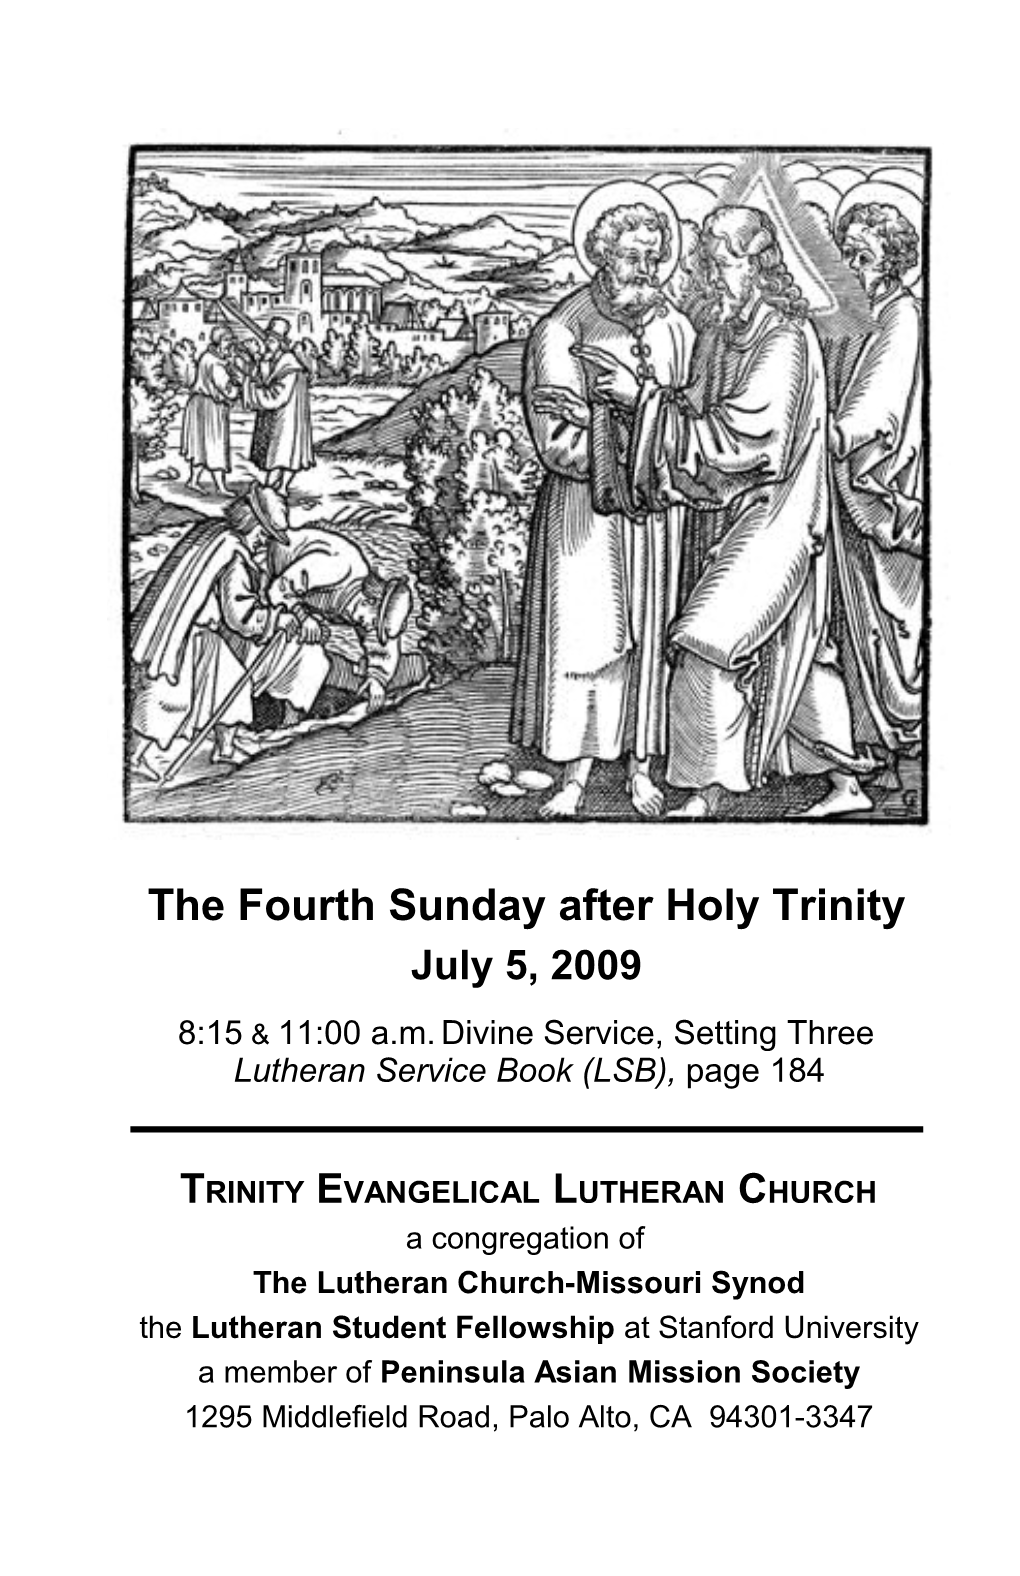 The Fourth Sunday After Holy Trinity